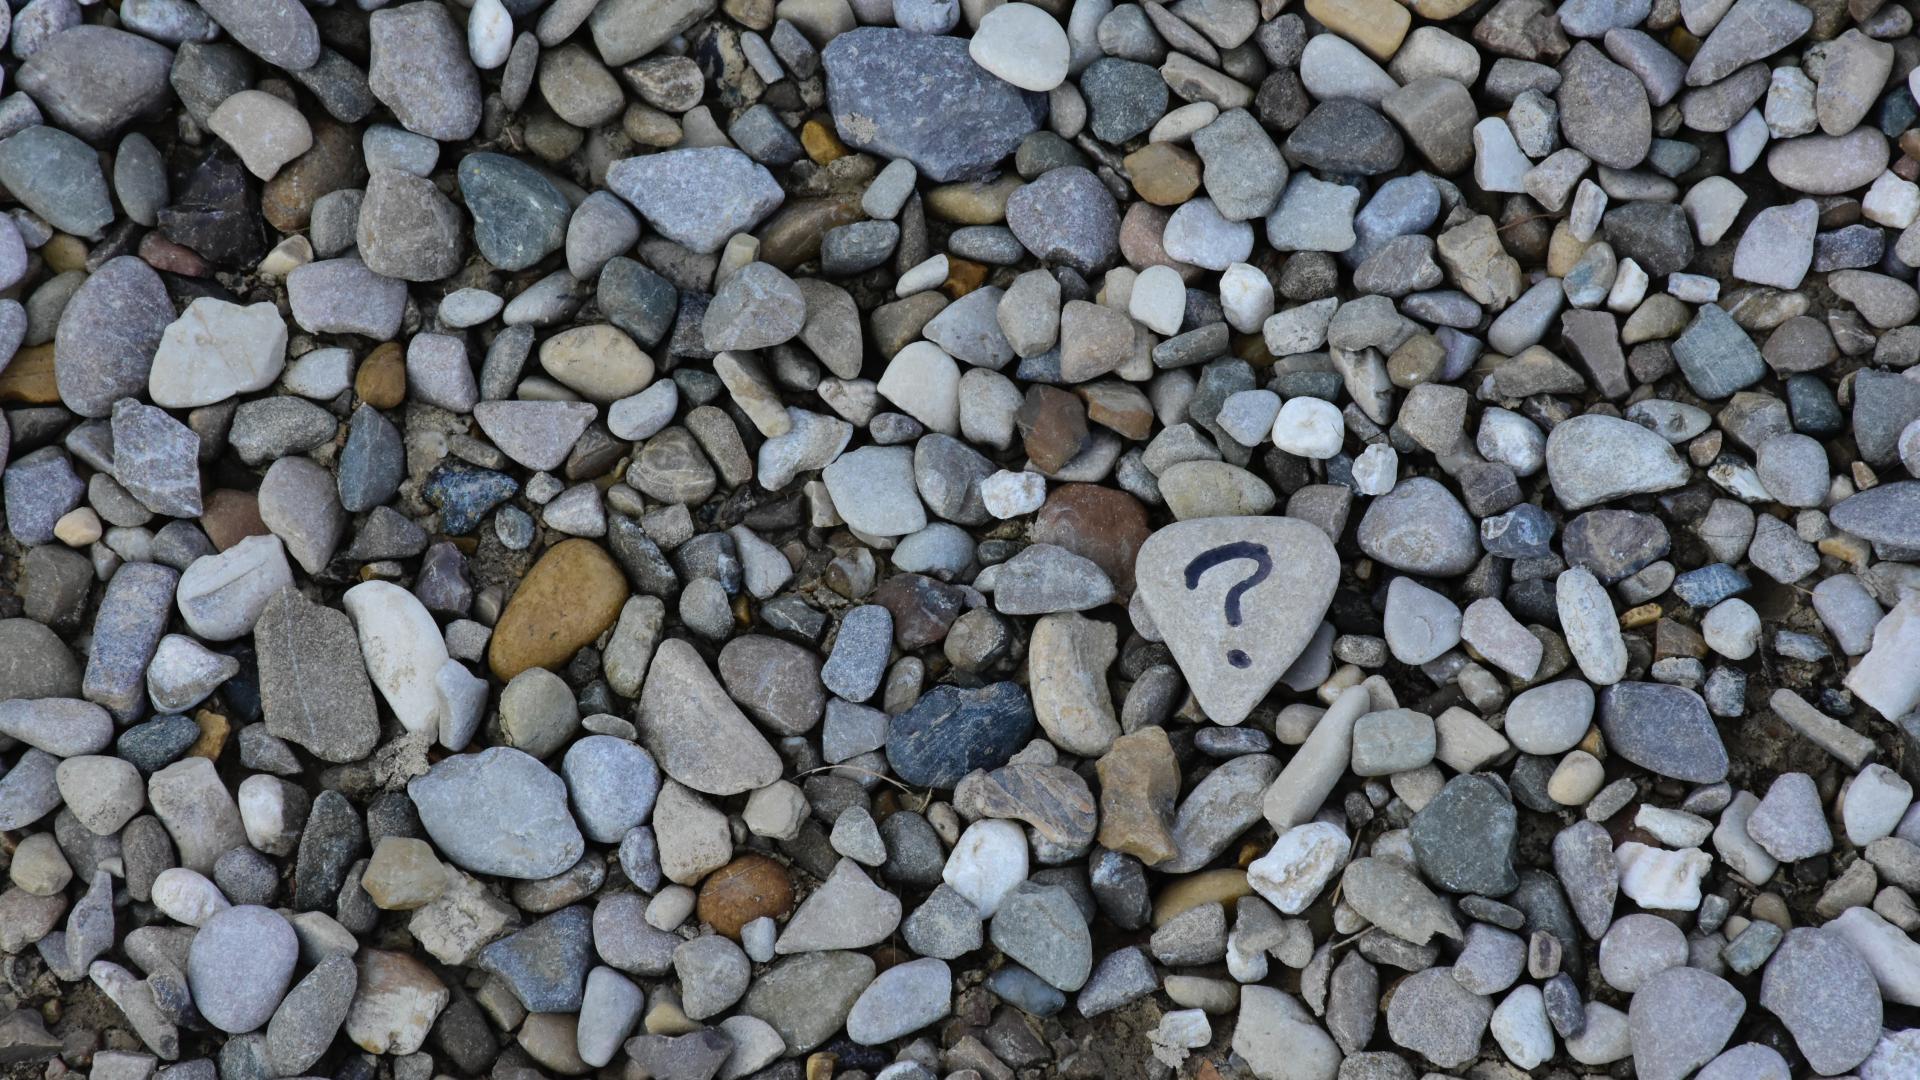 Pebble beach, one rock has a question mark on it